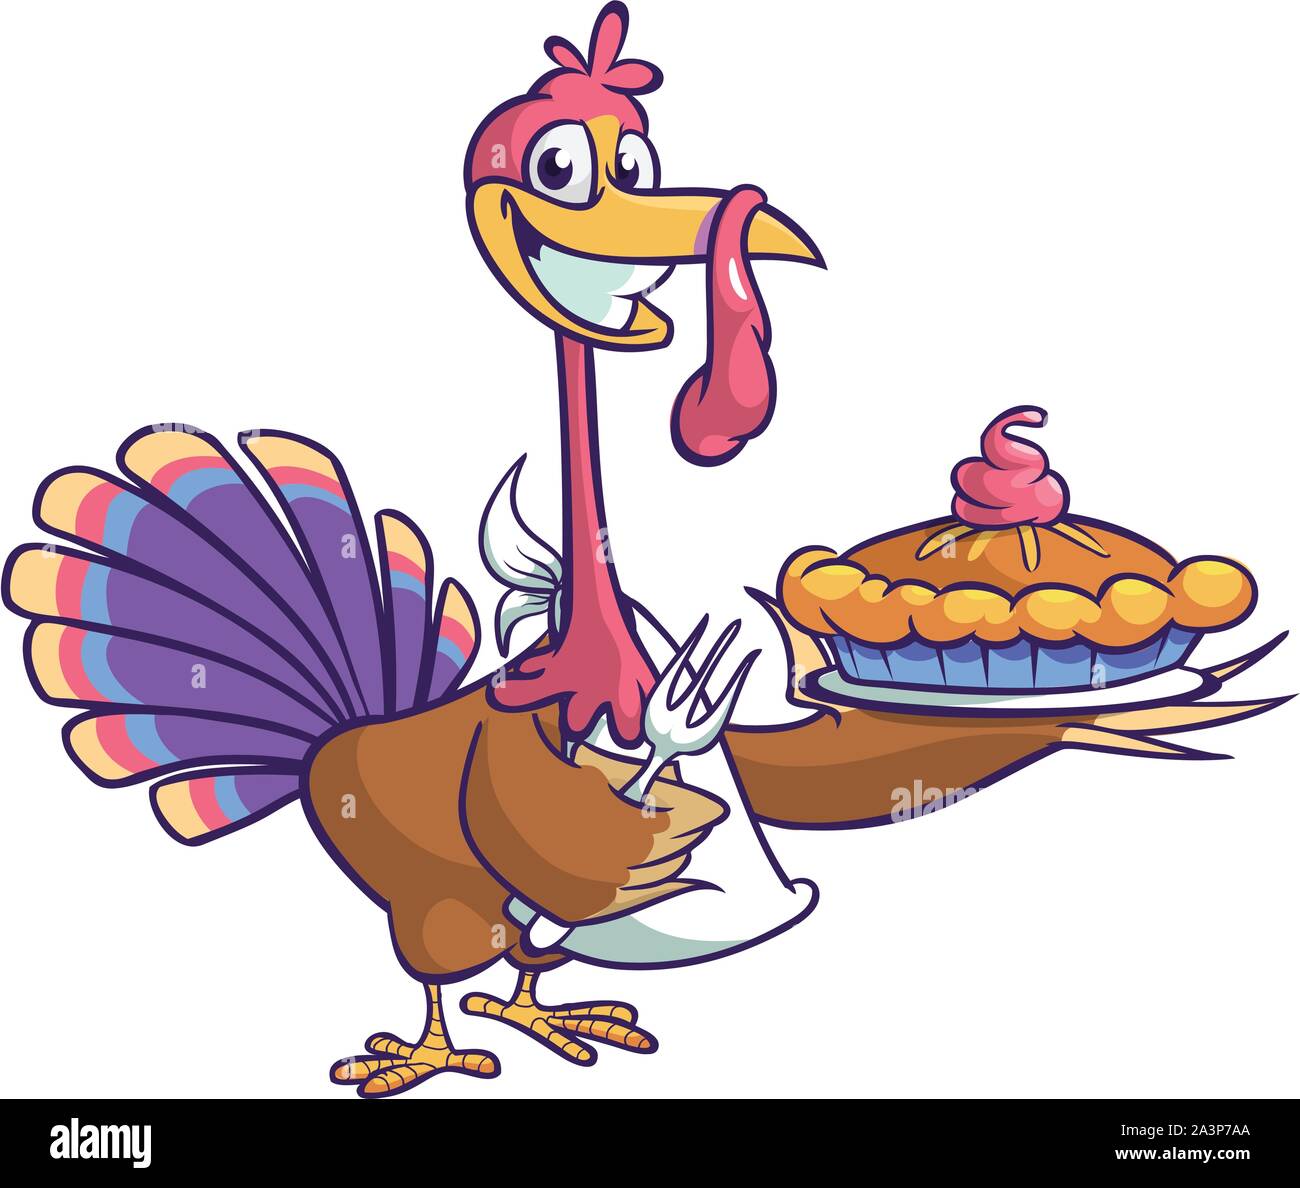 Thanksgiving Cartoon Turkey bird holding fork and pie isolated. Vector illustration of funny turkey character clipart Stock Vector